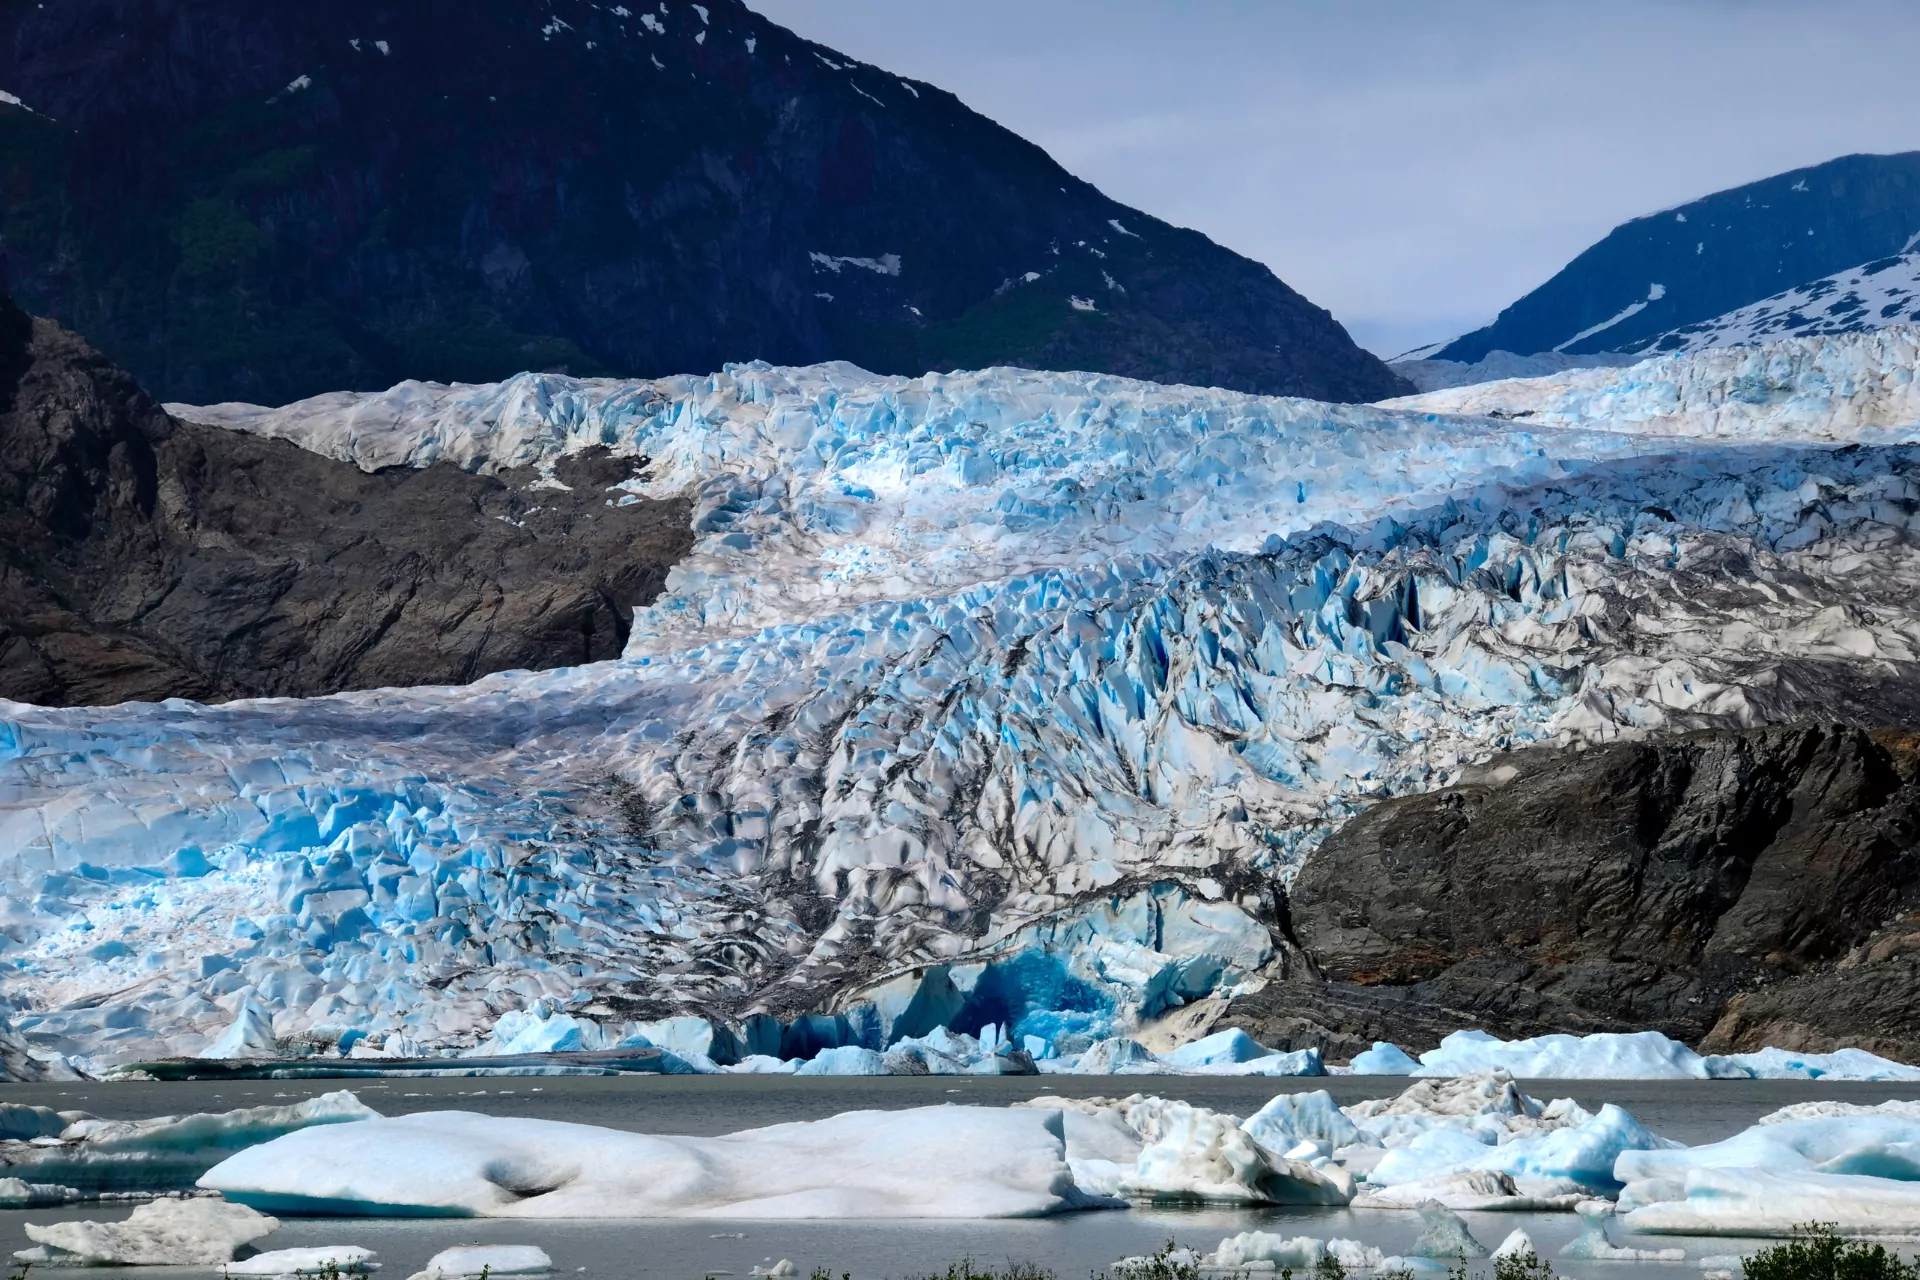 A must-visit destination for anyone traveling to Juneau, Alaska's capital city, is the Mendenhall Glacier, located in the Tongass National Forest and stretching over twelve miles long from the Juneau Icefield to the beautiful Mendenhall Lake.